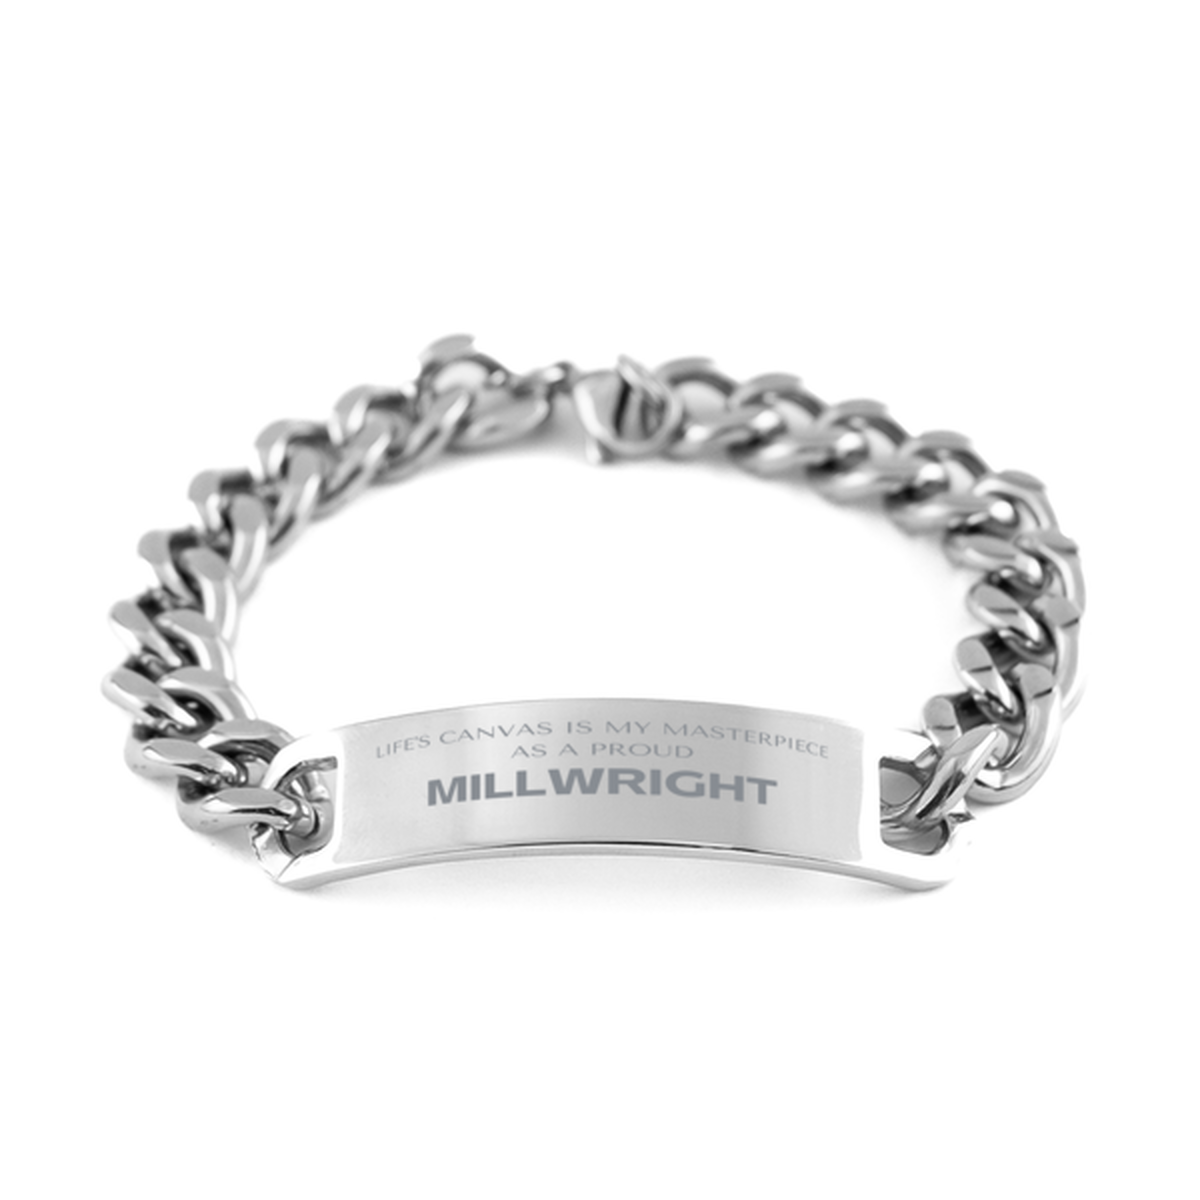 Proud Millwright Gifts, Life's canvas is my masterpiece, Epic Birthday Christmas Unique Cuban Chain Stainless Steel Bracelet For Millwright, Coworkers, Men, Women, Friends